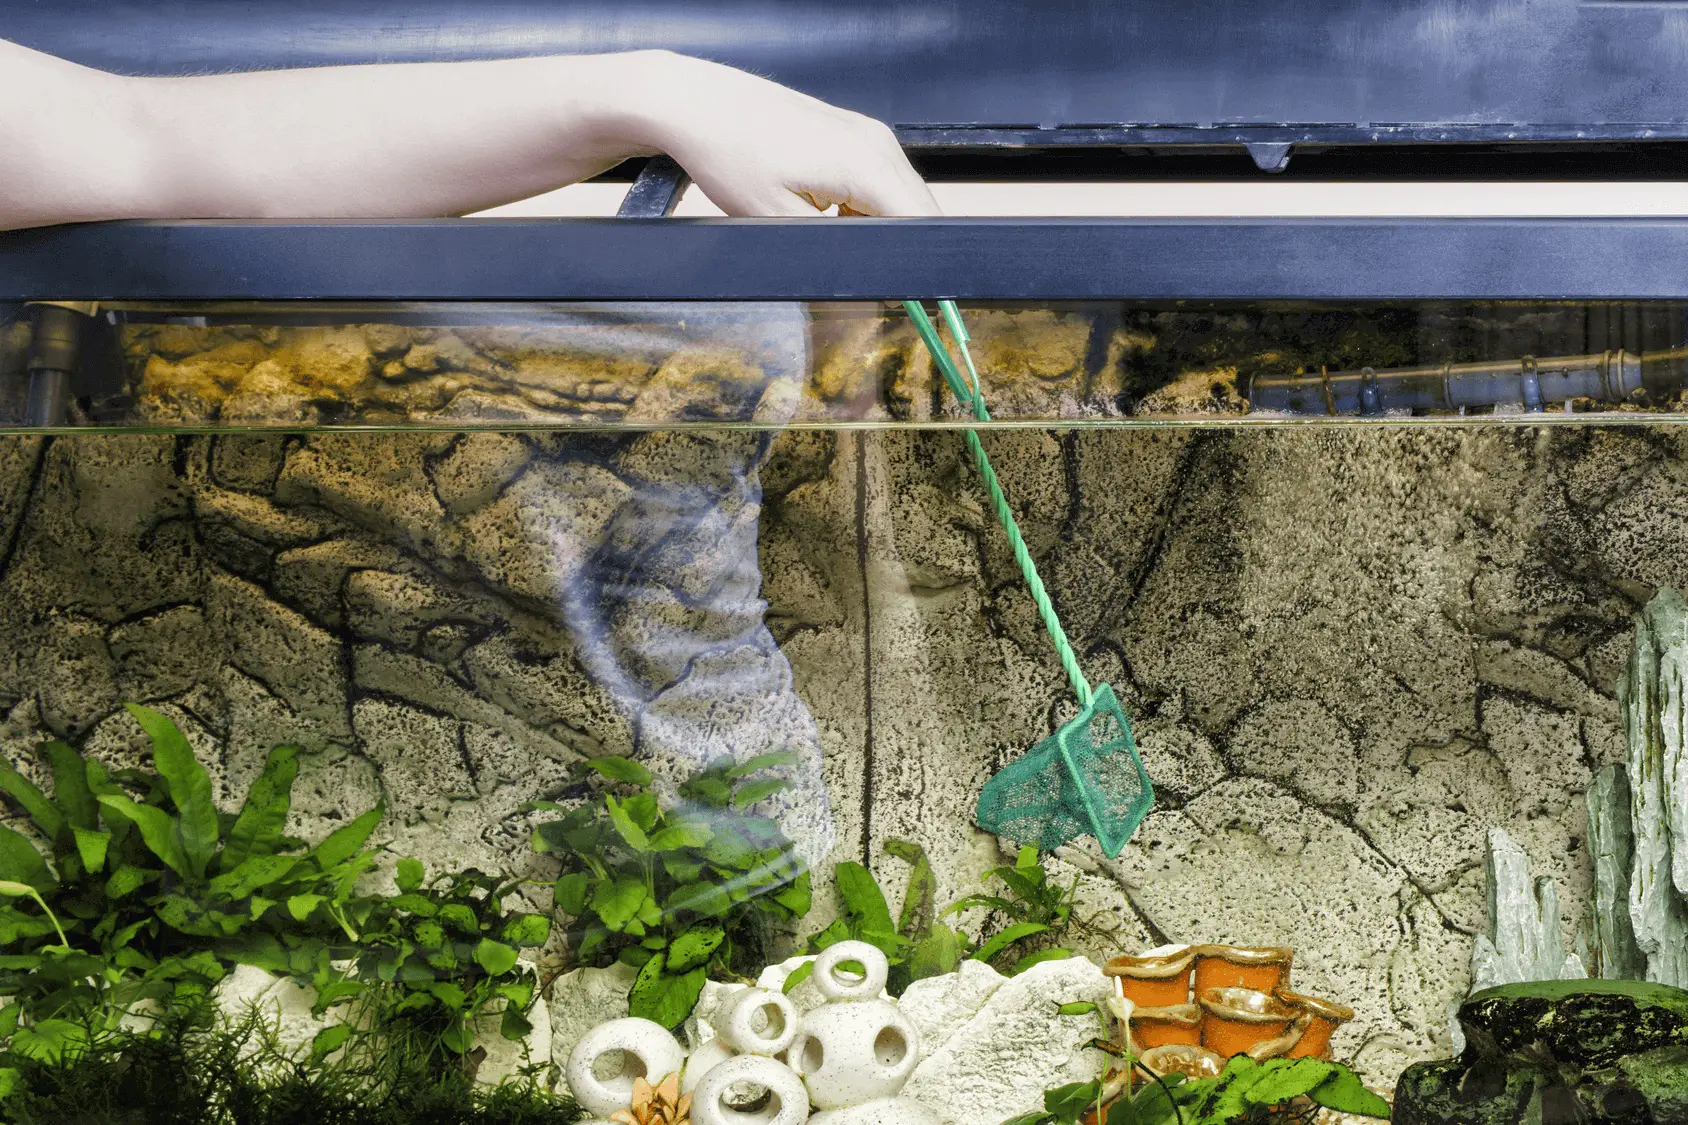 How To Clean A Fish Tank In Five Easy Steps Fishkeeping World,Sealife Systems Wet Dry Filter